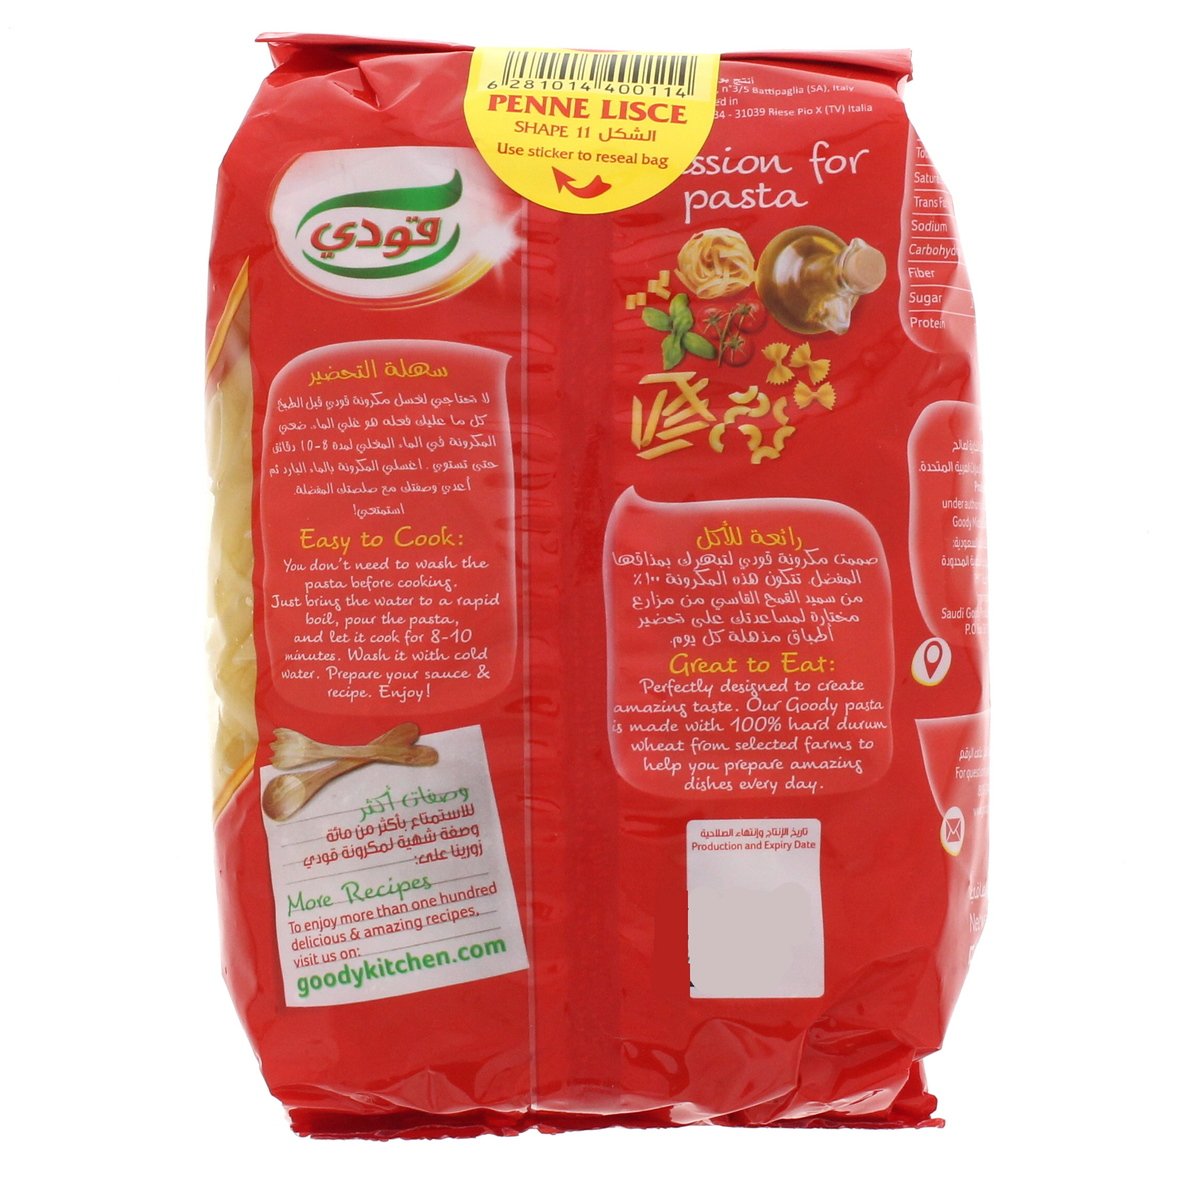 Goody Penne Lisce Pasta 500g